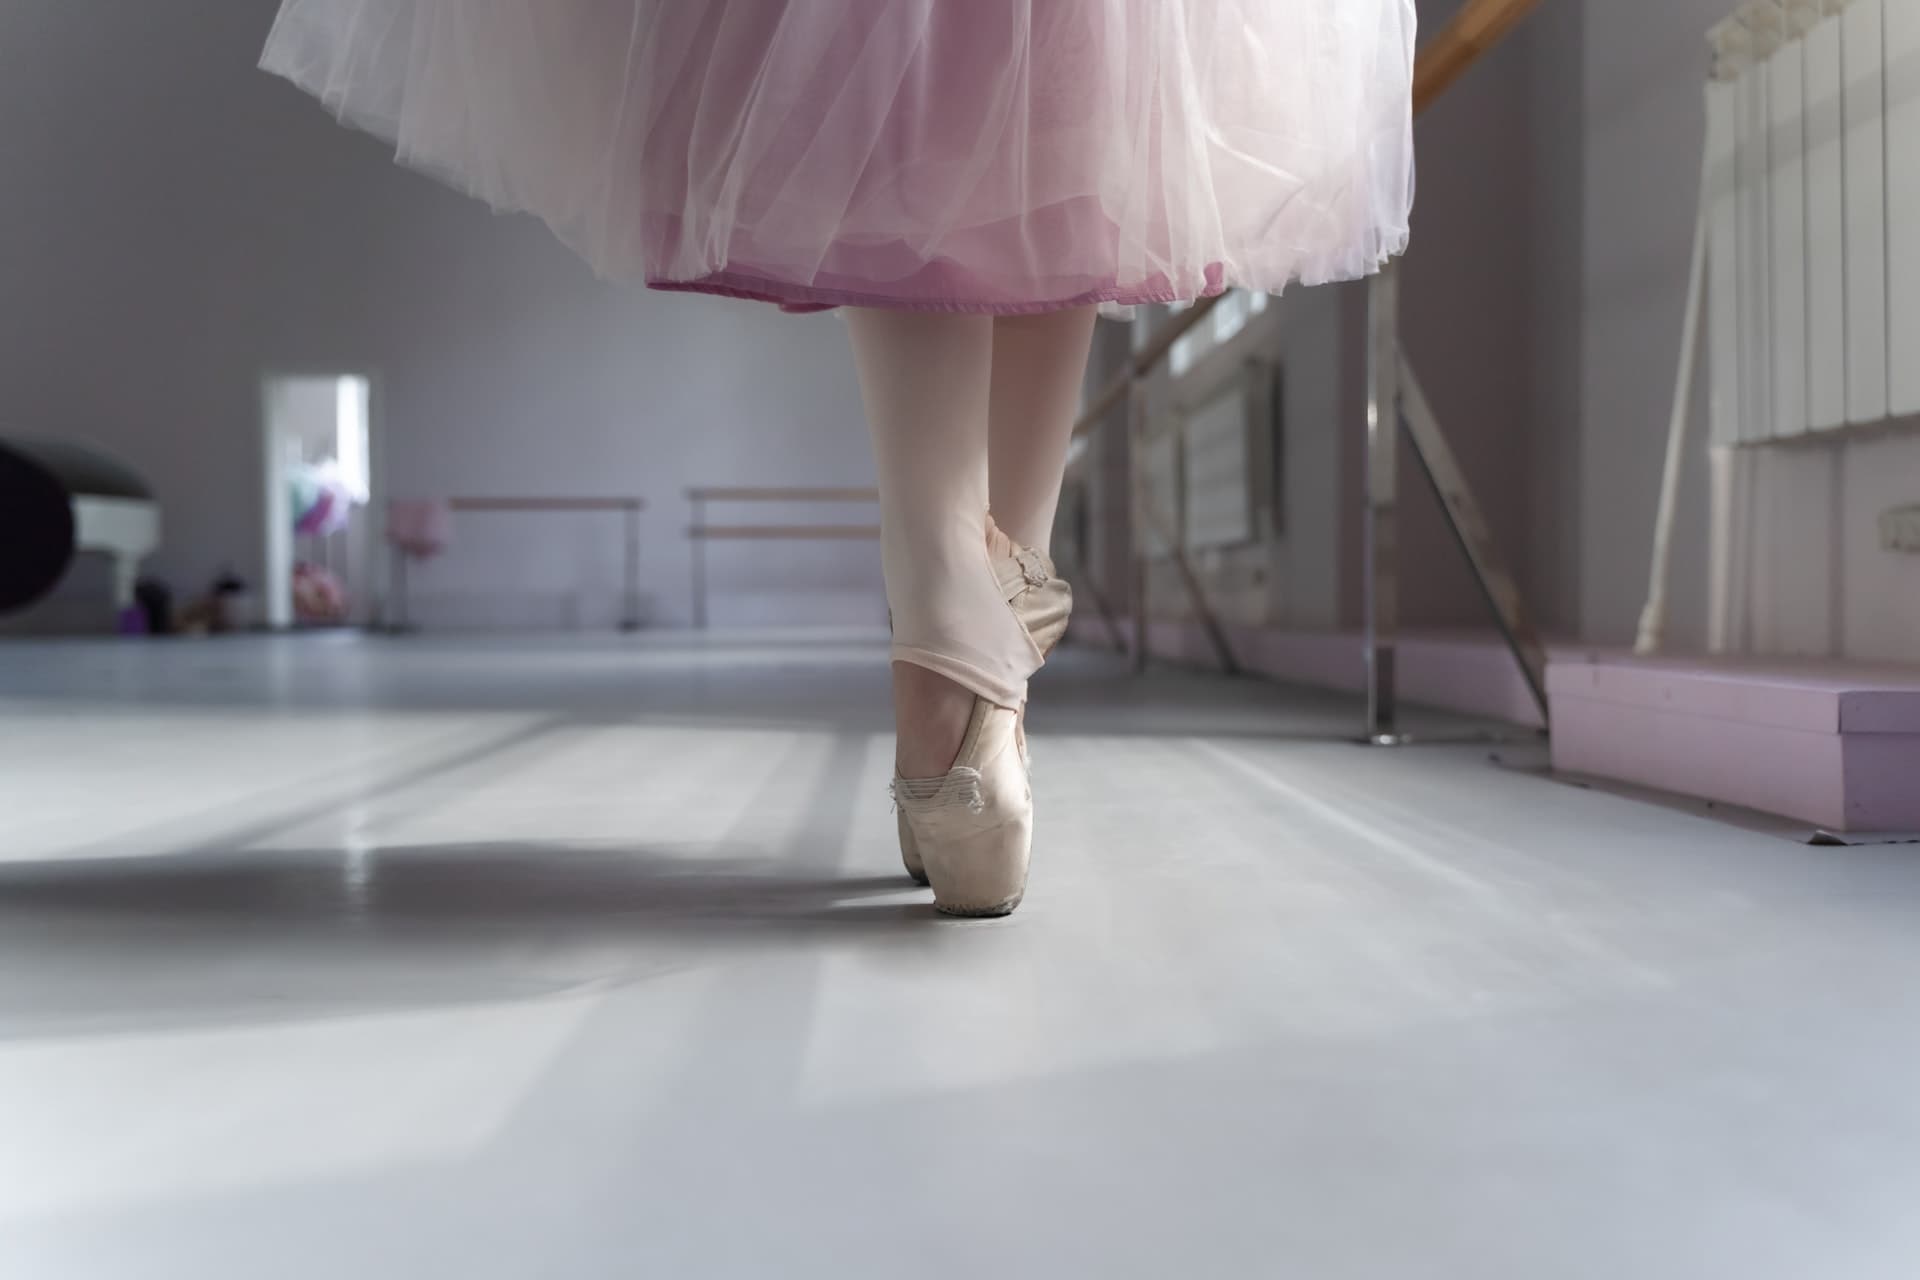 the feet and lower legs of a female ballet dancer on her toes in very light pink ballet shoes at a dance studio, she has a pink skirt and the ballet dance studio is empty except for her